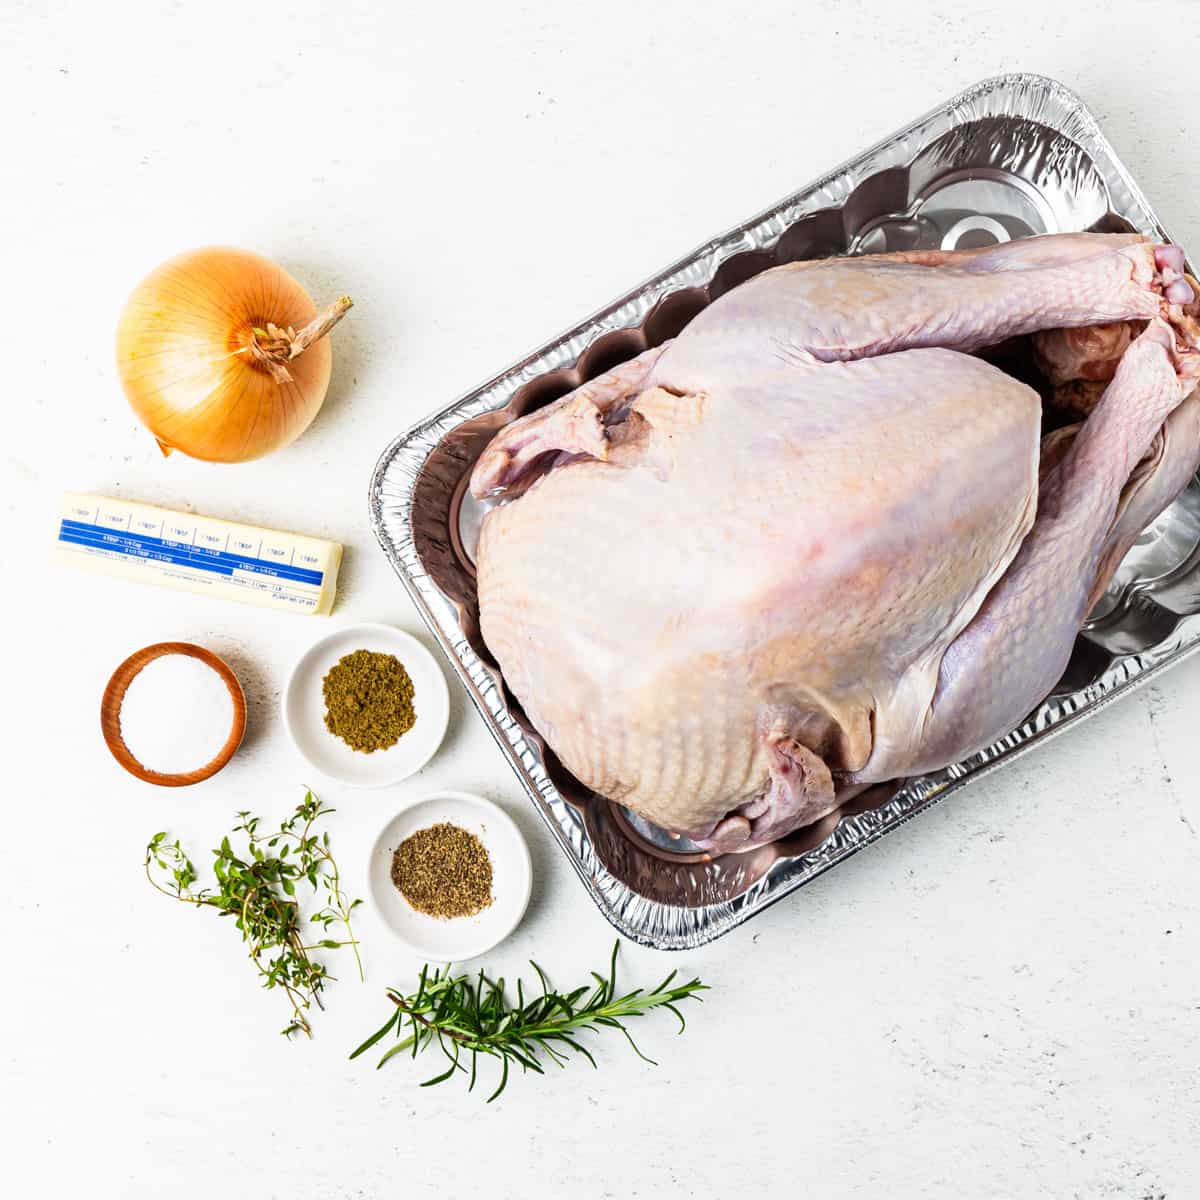 An turkey and ingredients for roasted turkey sitting on a counter.